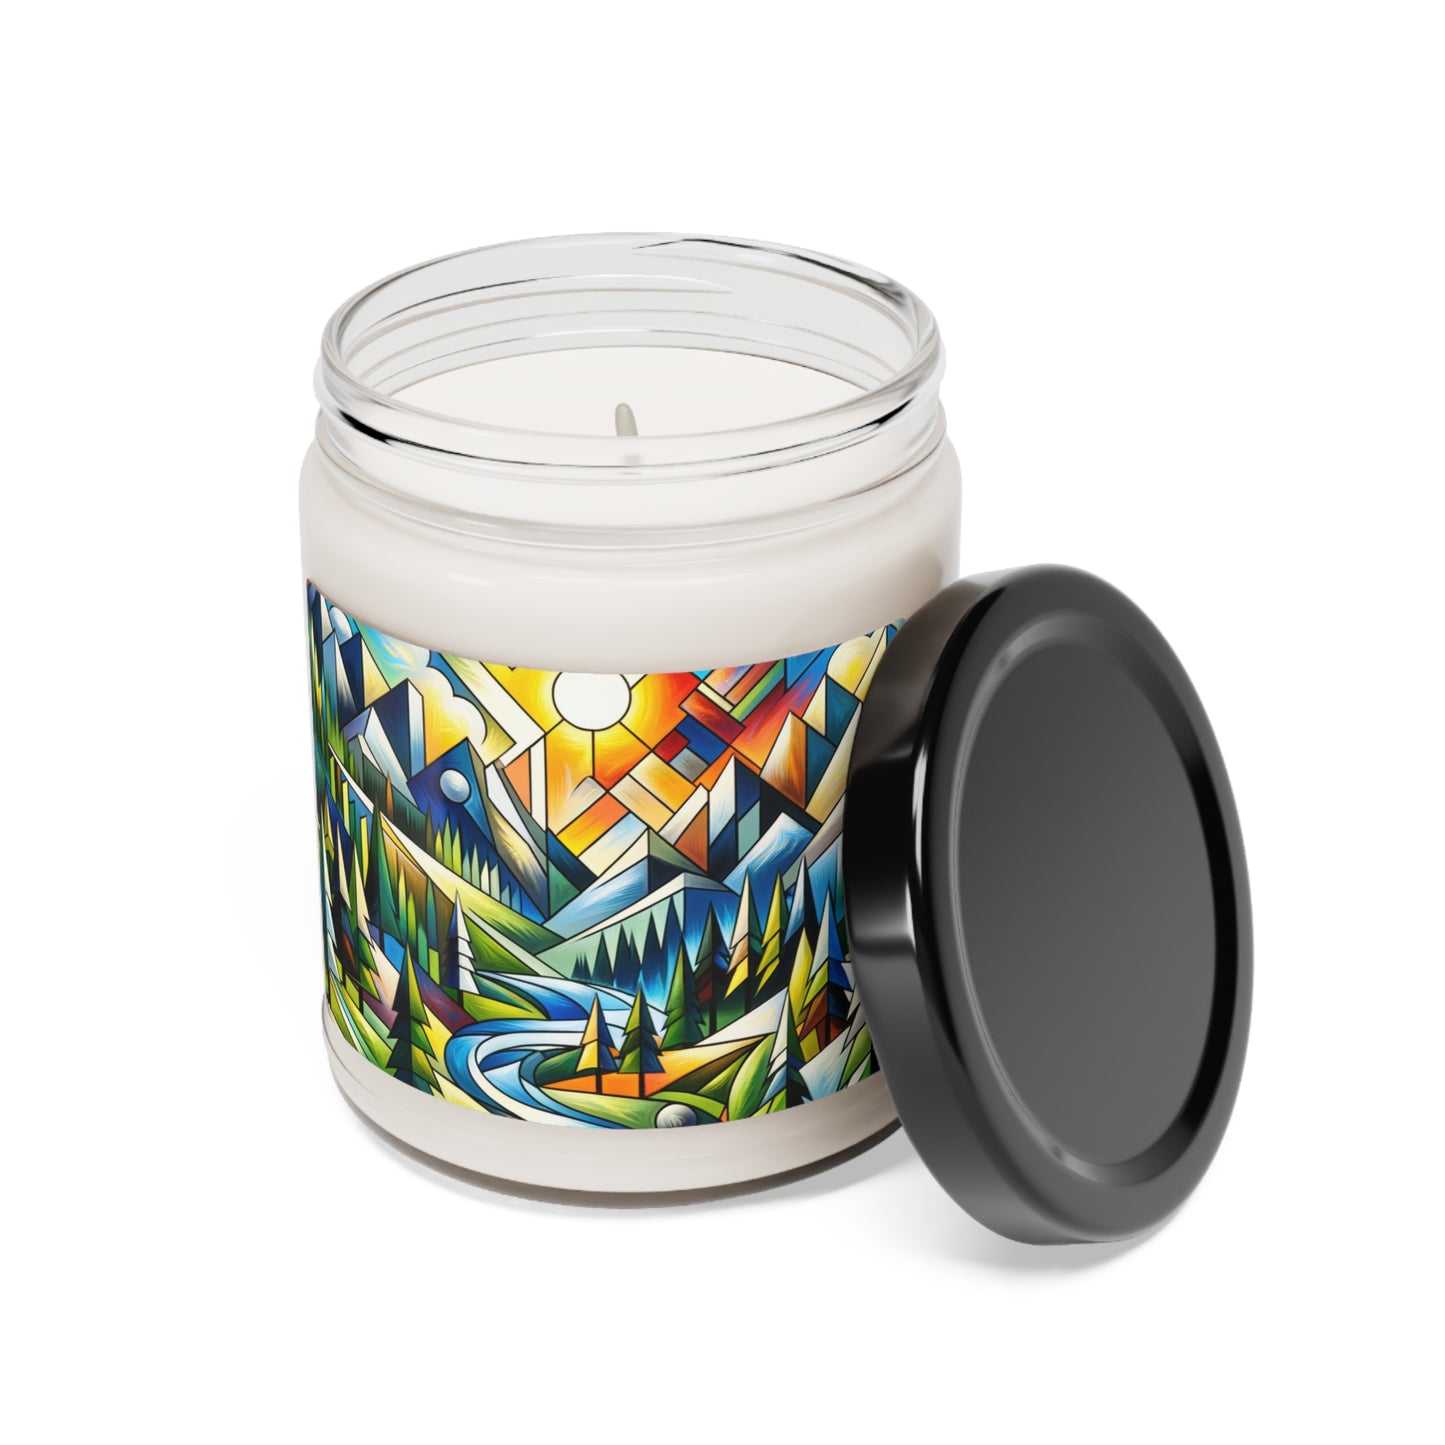 "Cubic Naturalism" - The Alien Scented Soy Candle 9oz Cubism Style